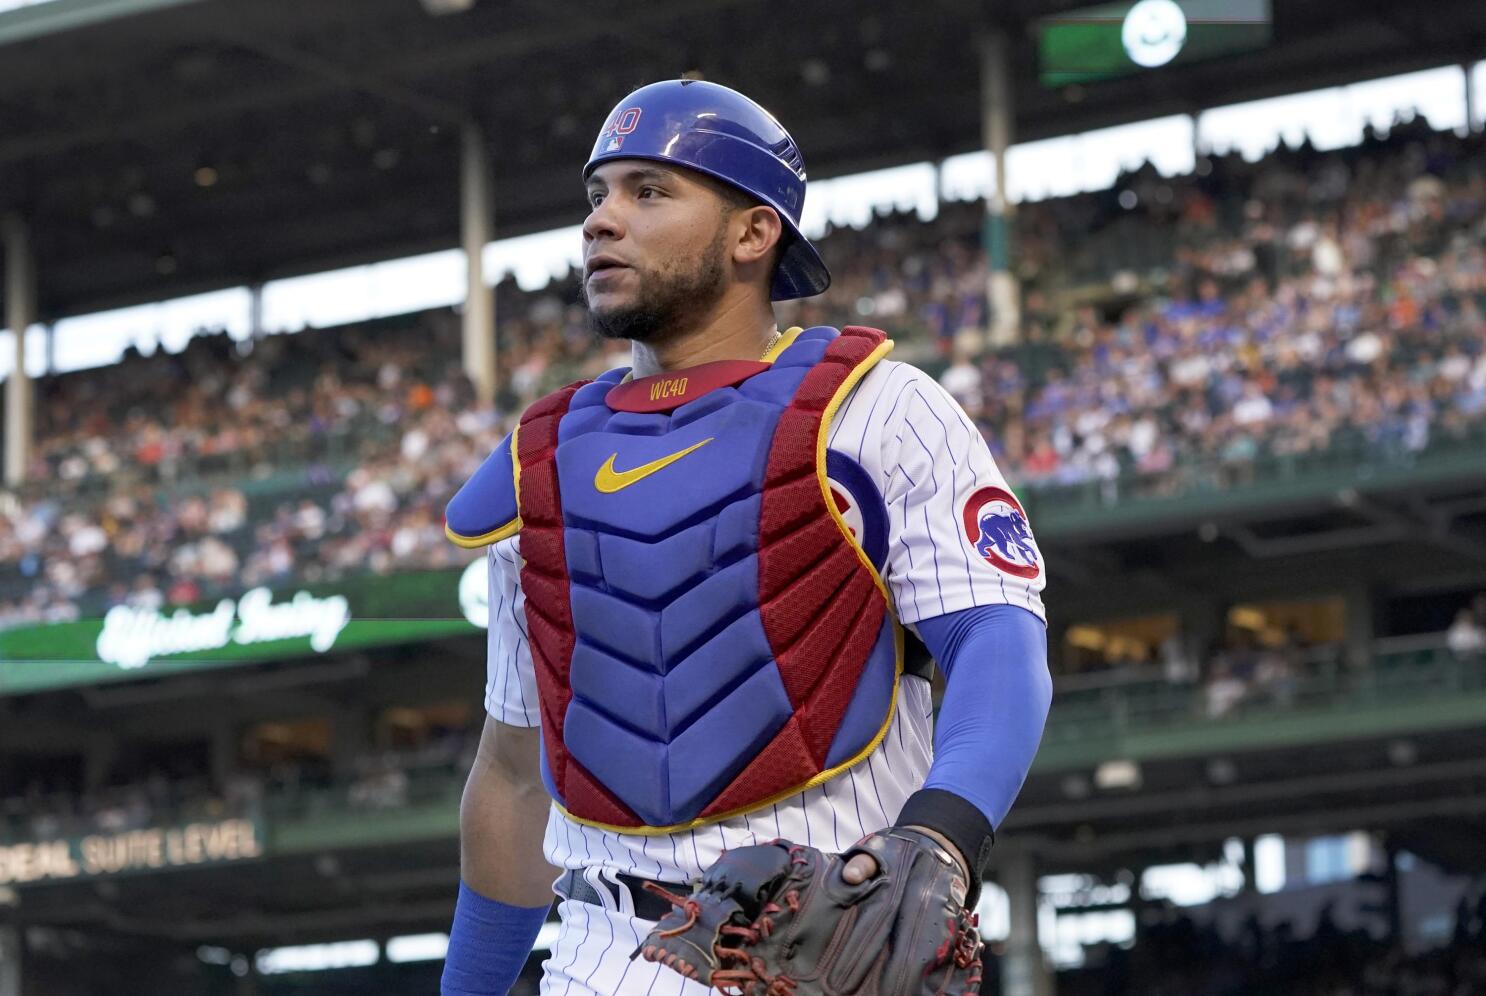 Willson Contreras Instagram activity is latest sign Cubs are trading him